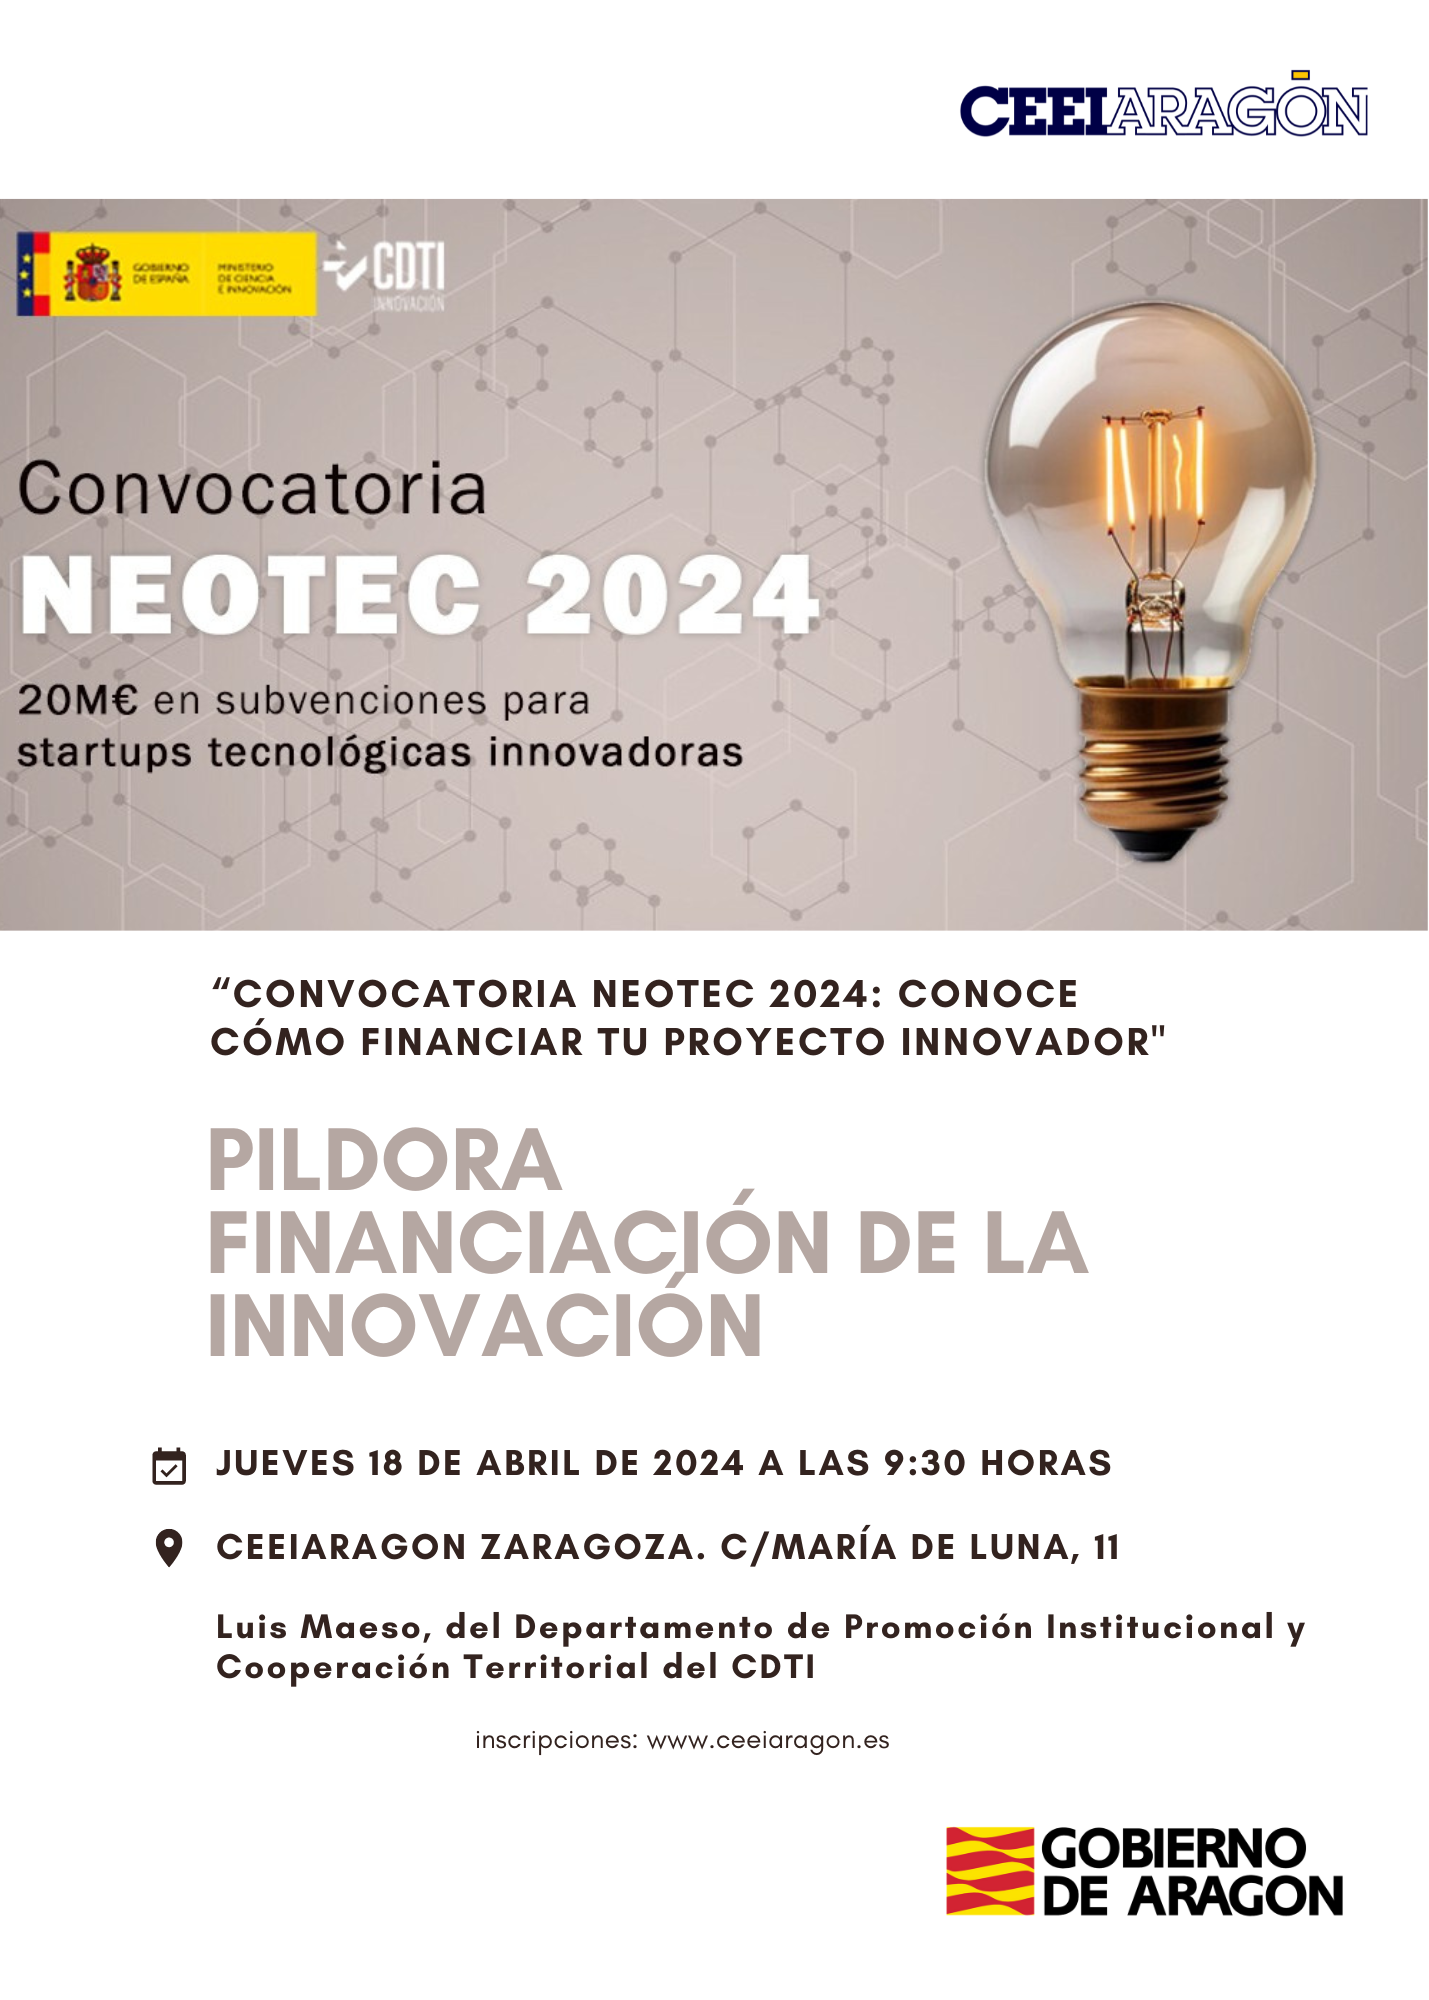 Innovation funding pill “NEOTEC call for proposals: find out how to finance your innovative project”